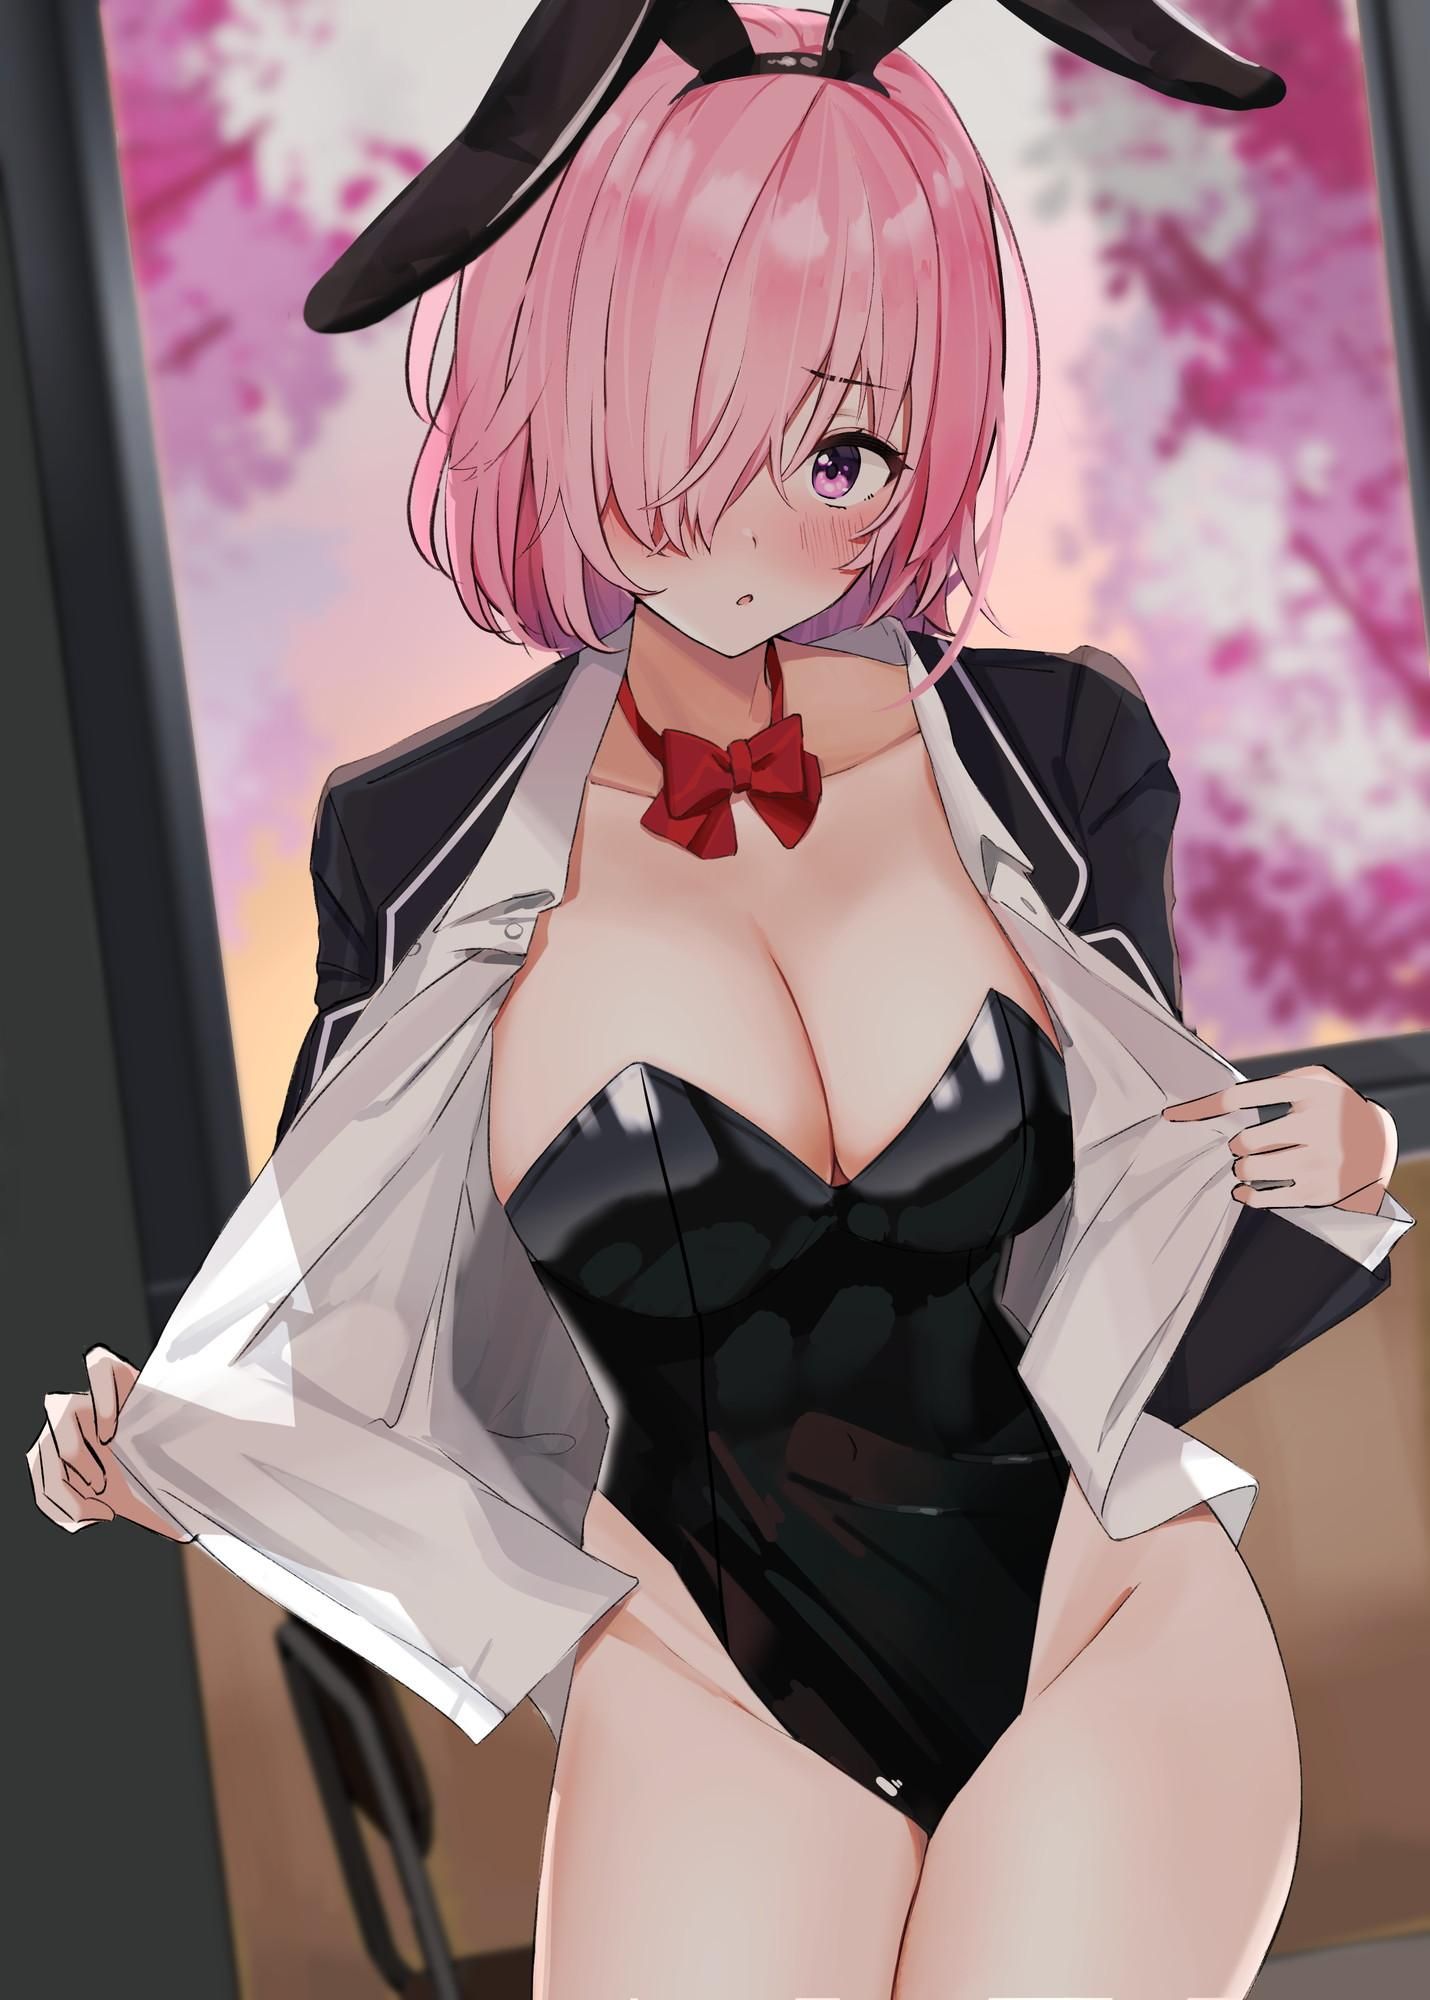 Bunny Girl Images Please! 7